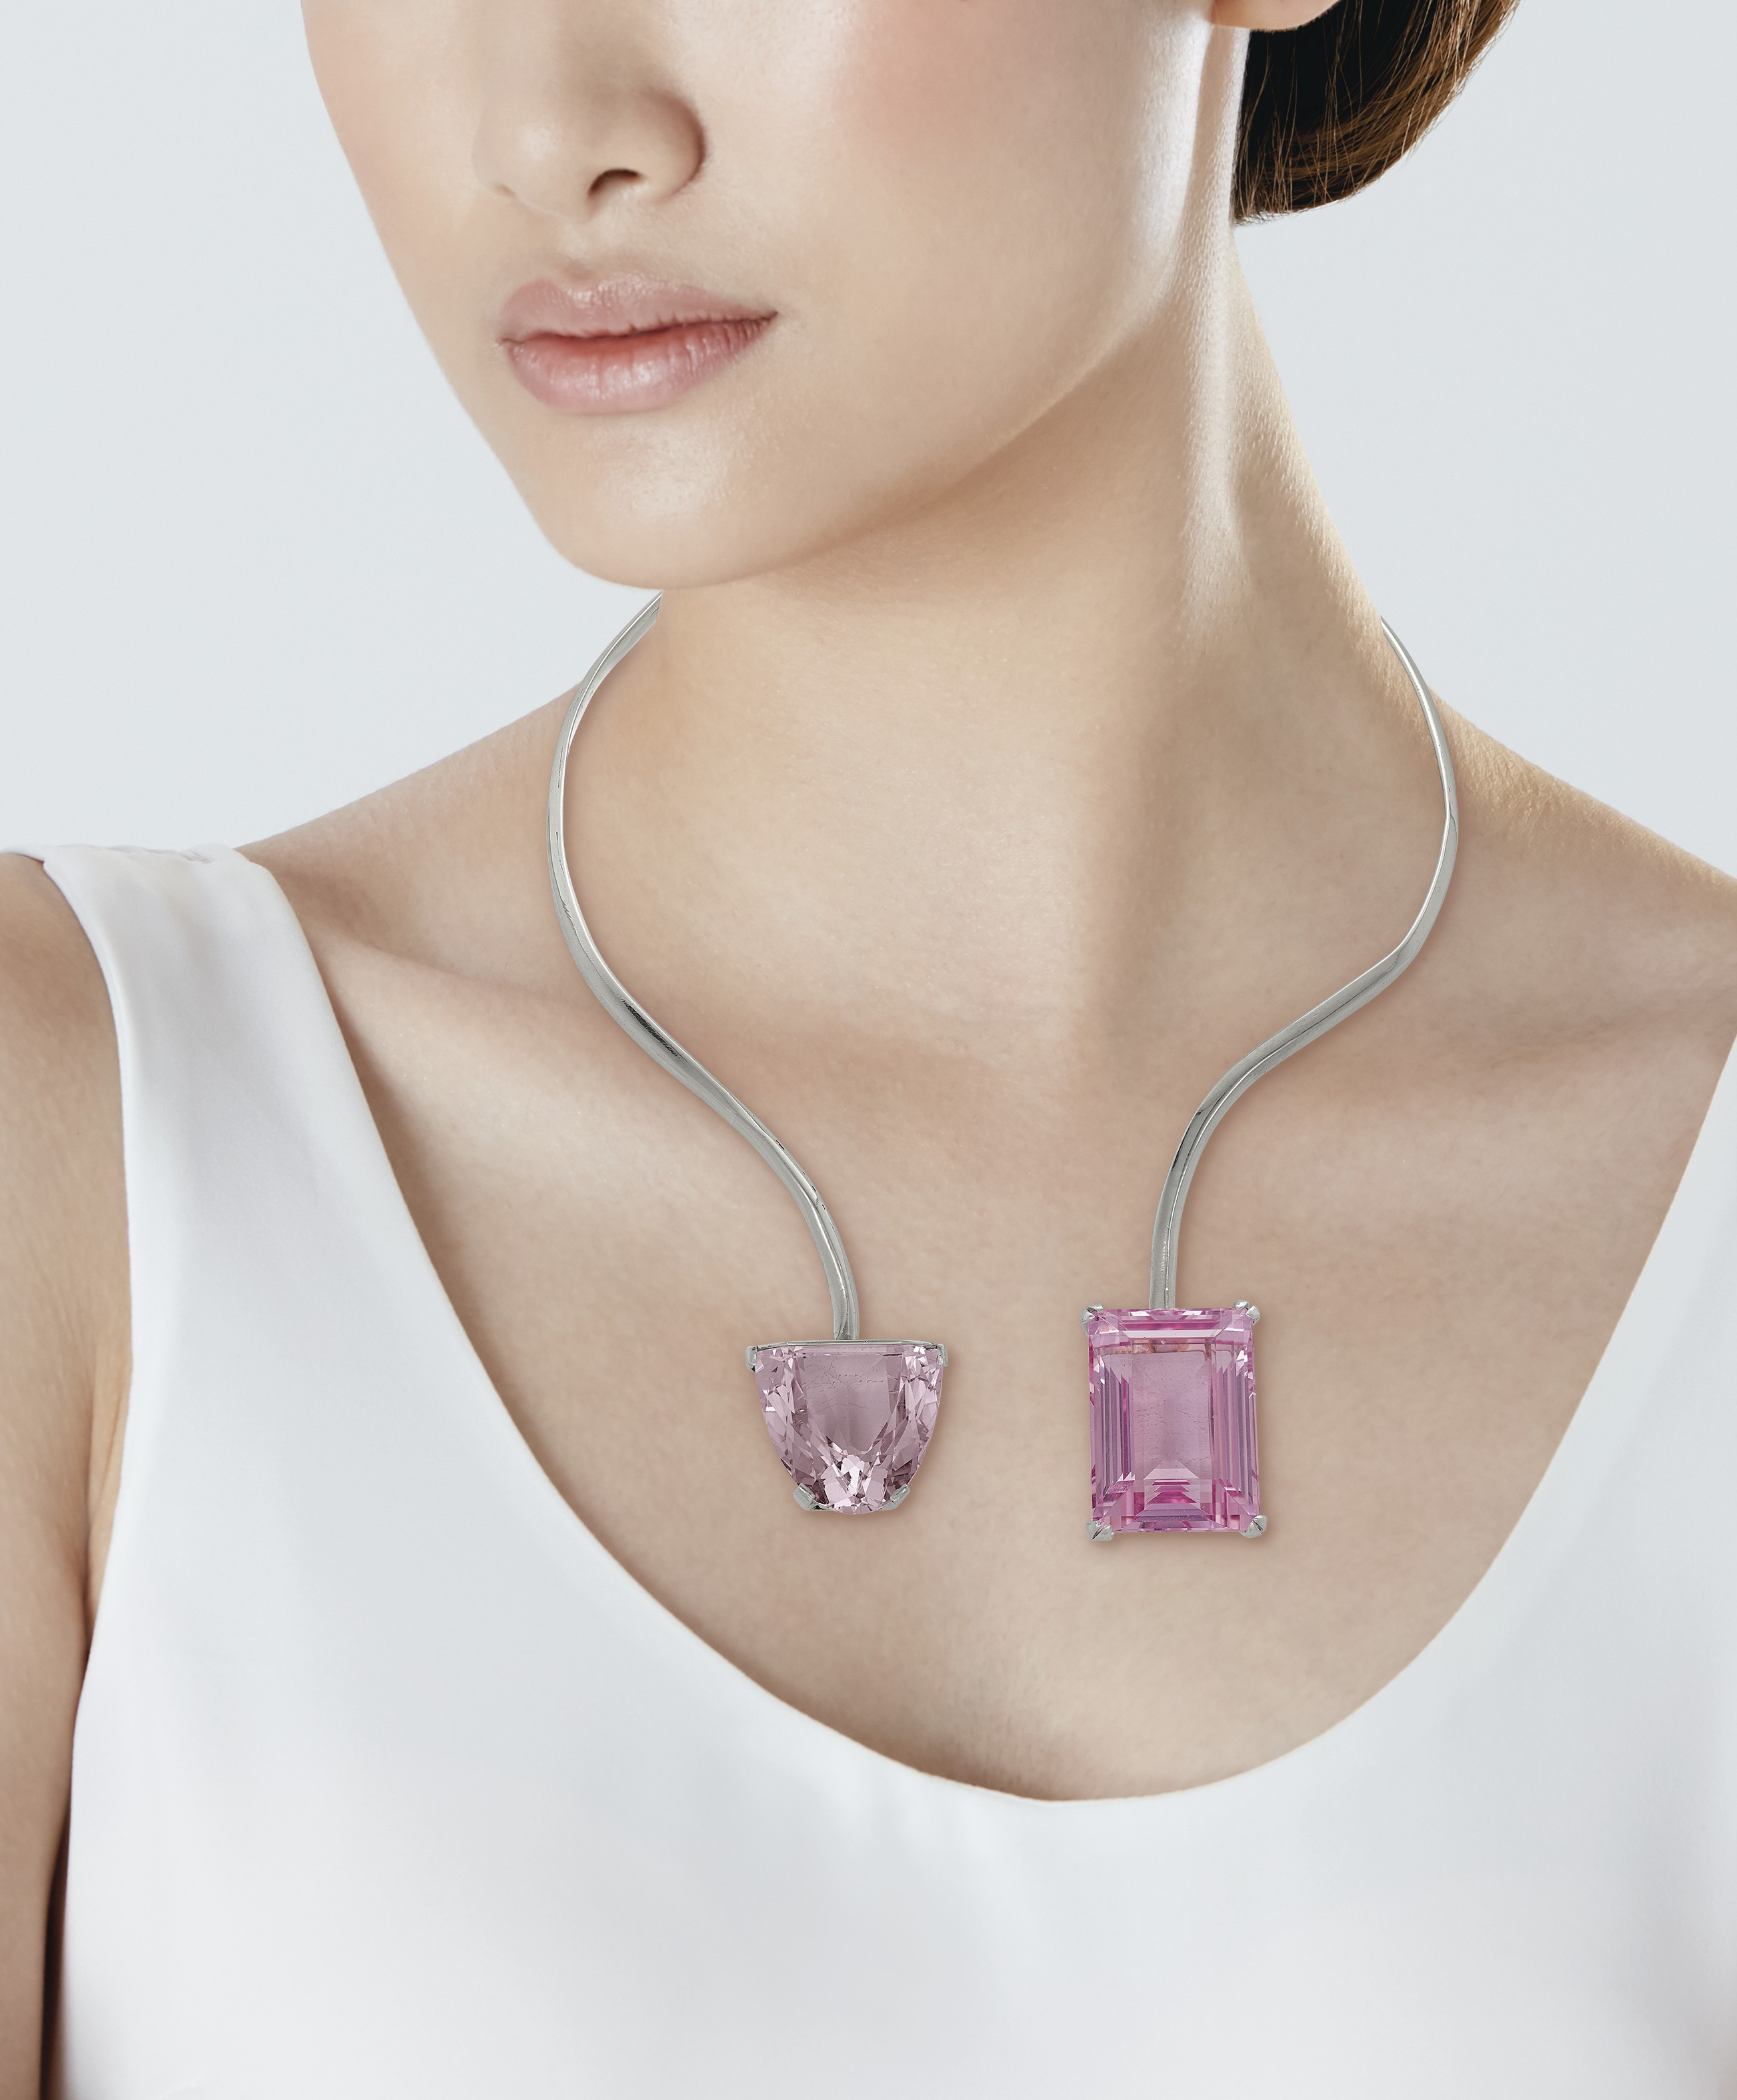 A woman wearing a necklace with two Kunzite pendants